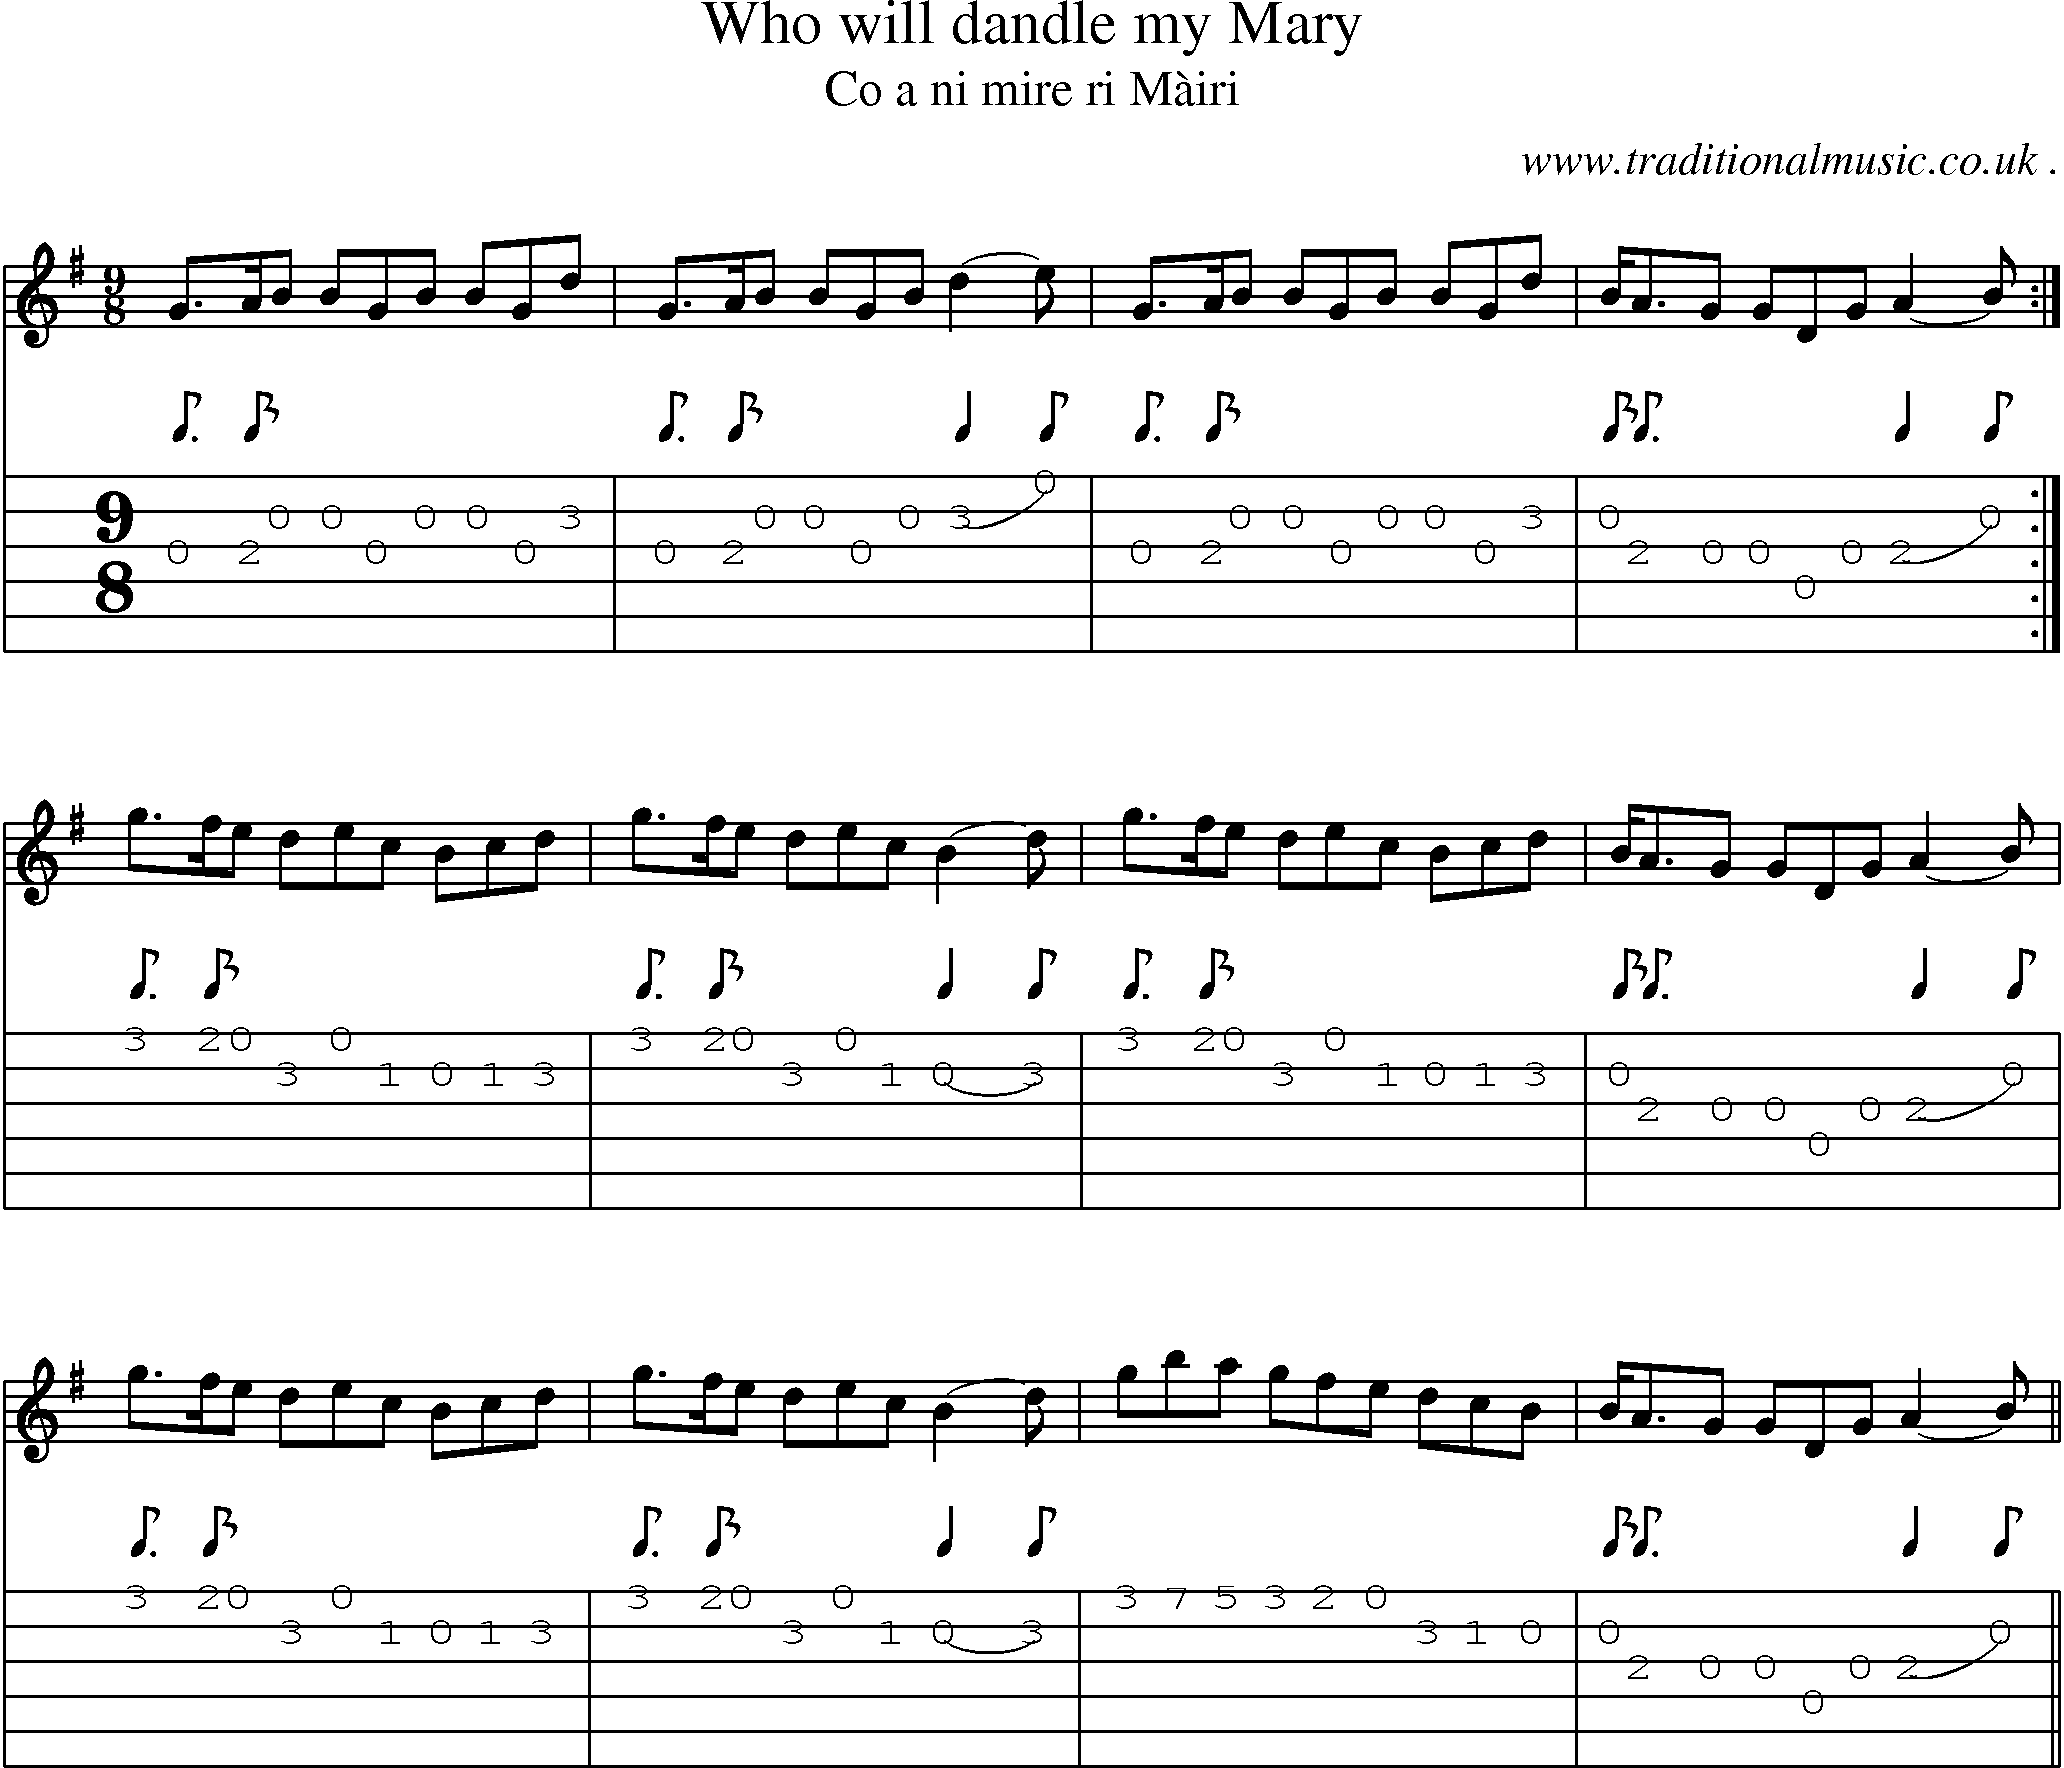 Sheet-music  score, Chords and Guitar Tabs for Who Will Dandle My Mary